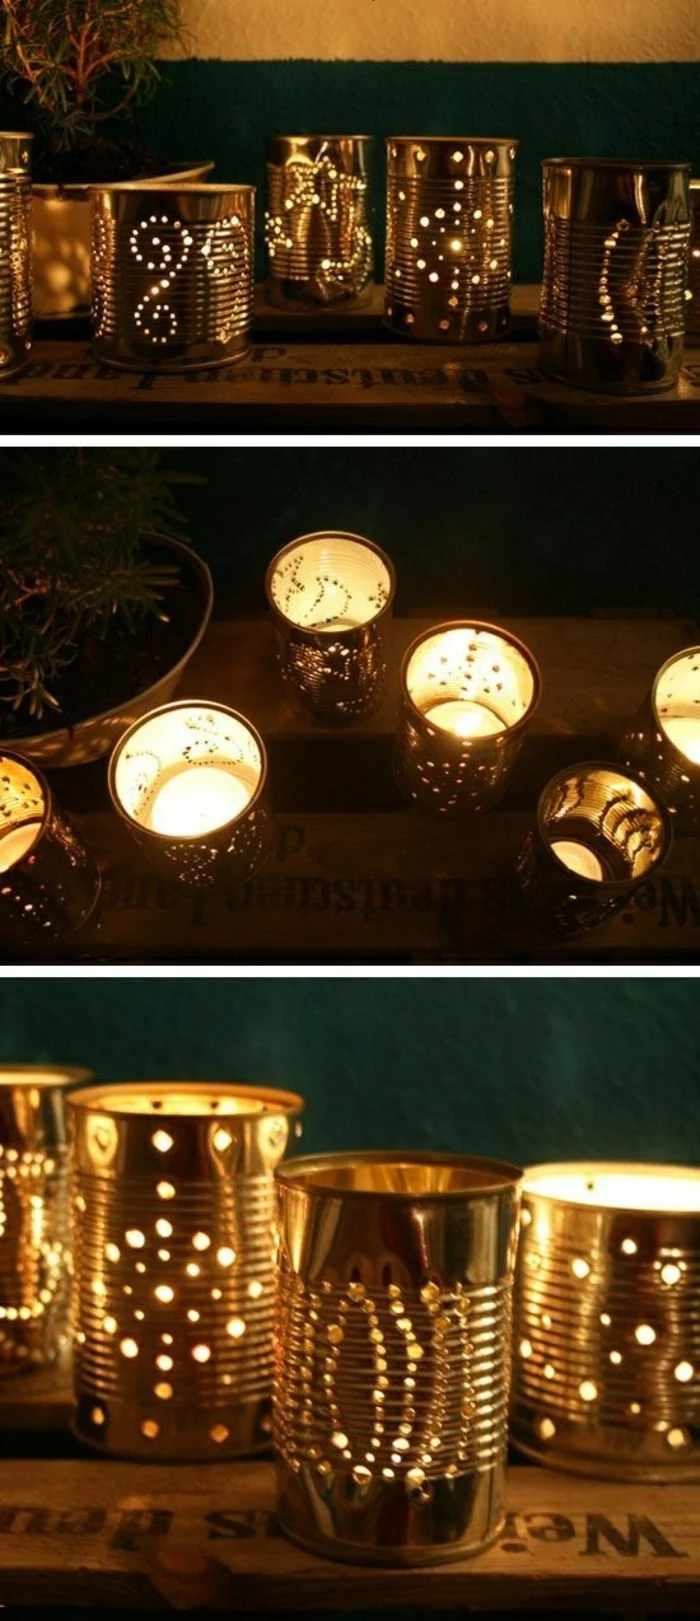 several luminaries made from tin cans with holes forming patterns, small candles placed inside them, close up of the patterns